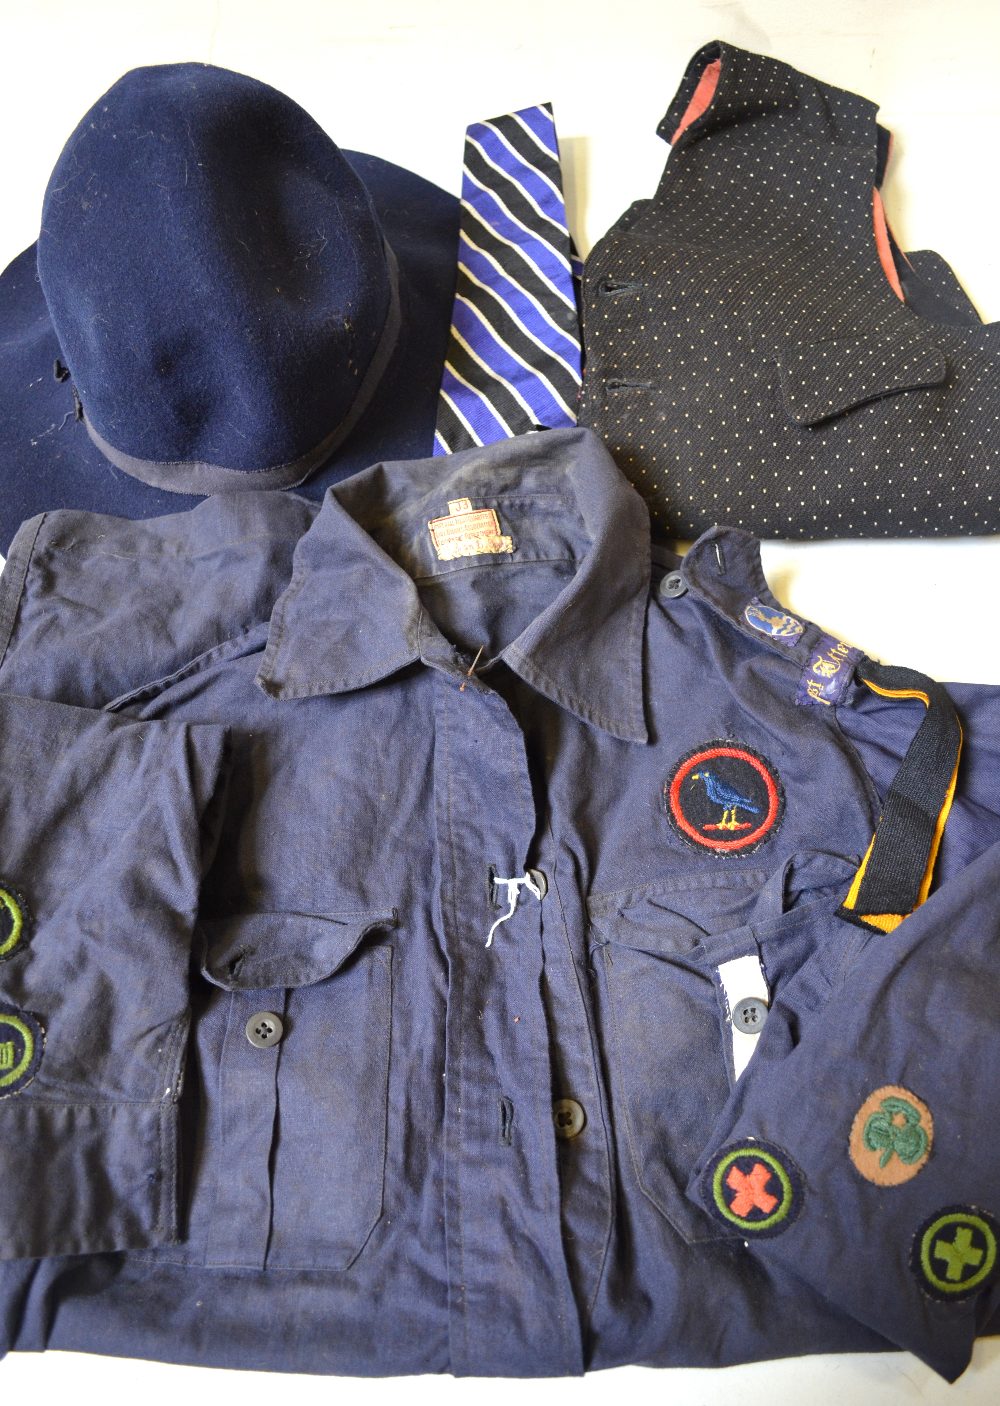 Early Girl Guide uniform and hat, school tie and a spotted waistcoat